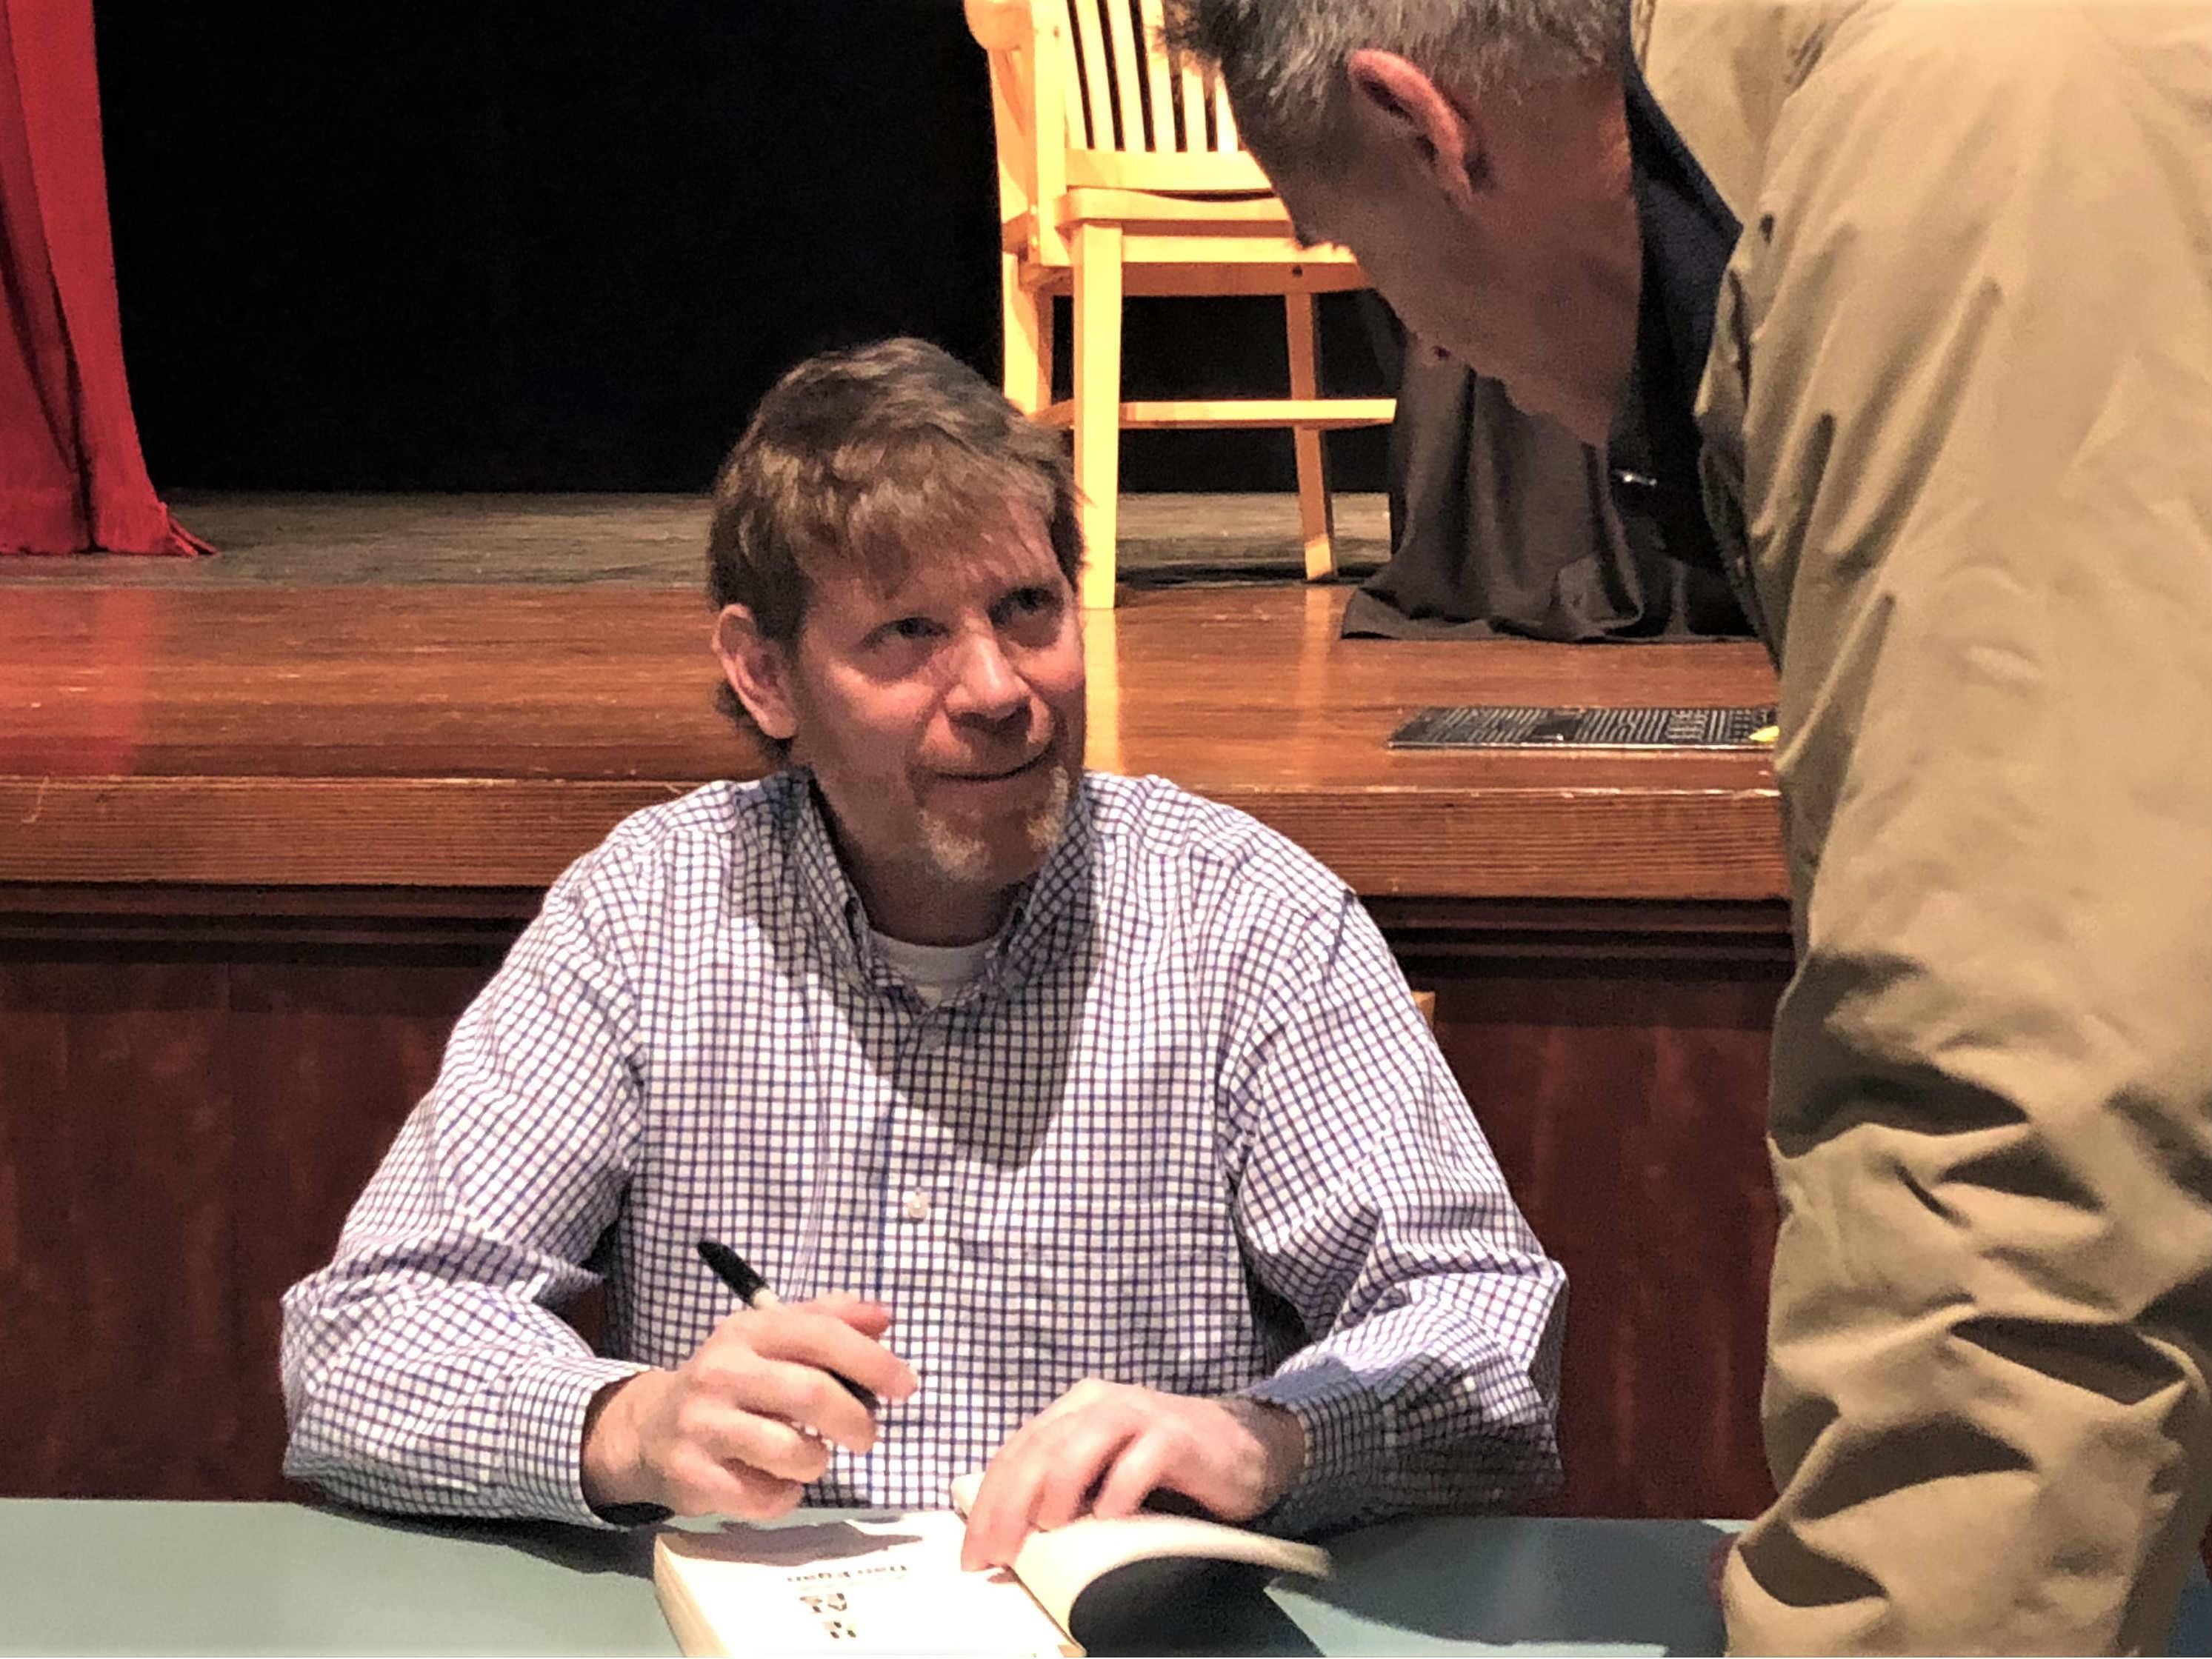 Author Dan Egan signs copies "The Death and Life of the Great Lakes" at a One Book One Chicago event. [WTTW/Patty Wetli]